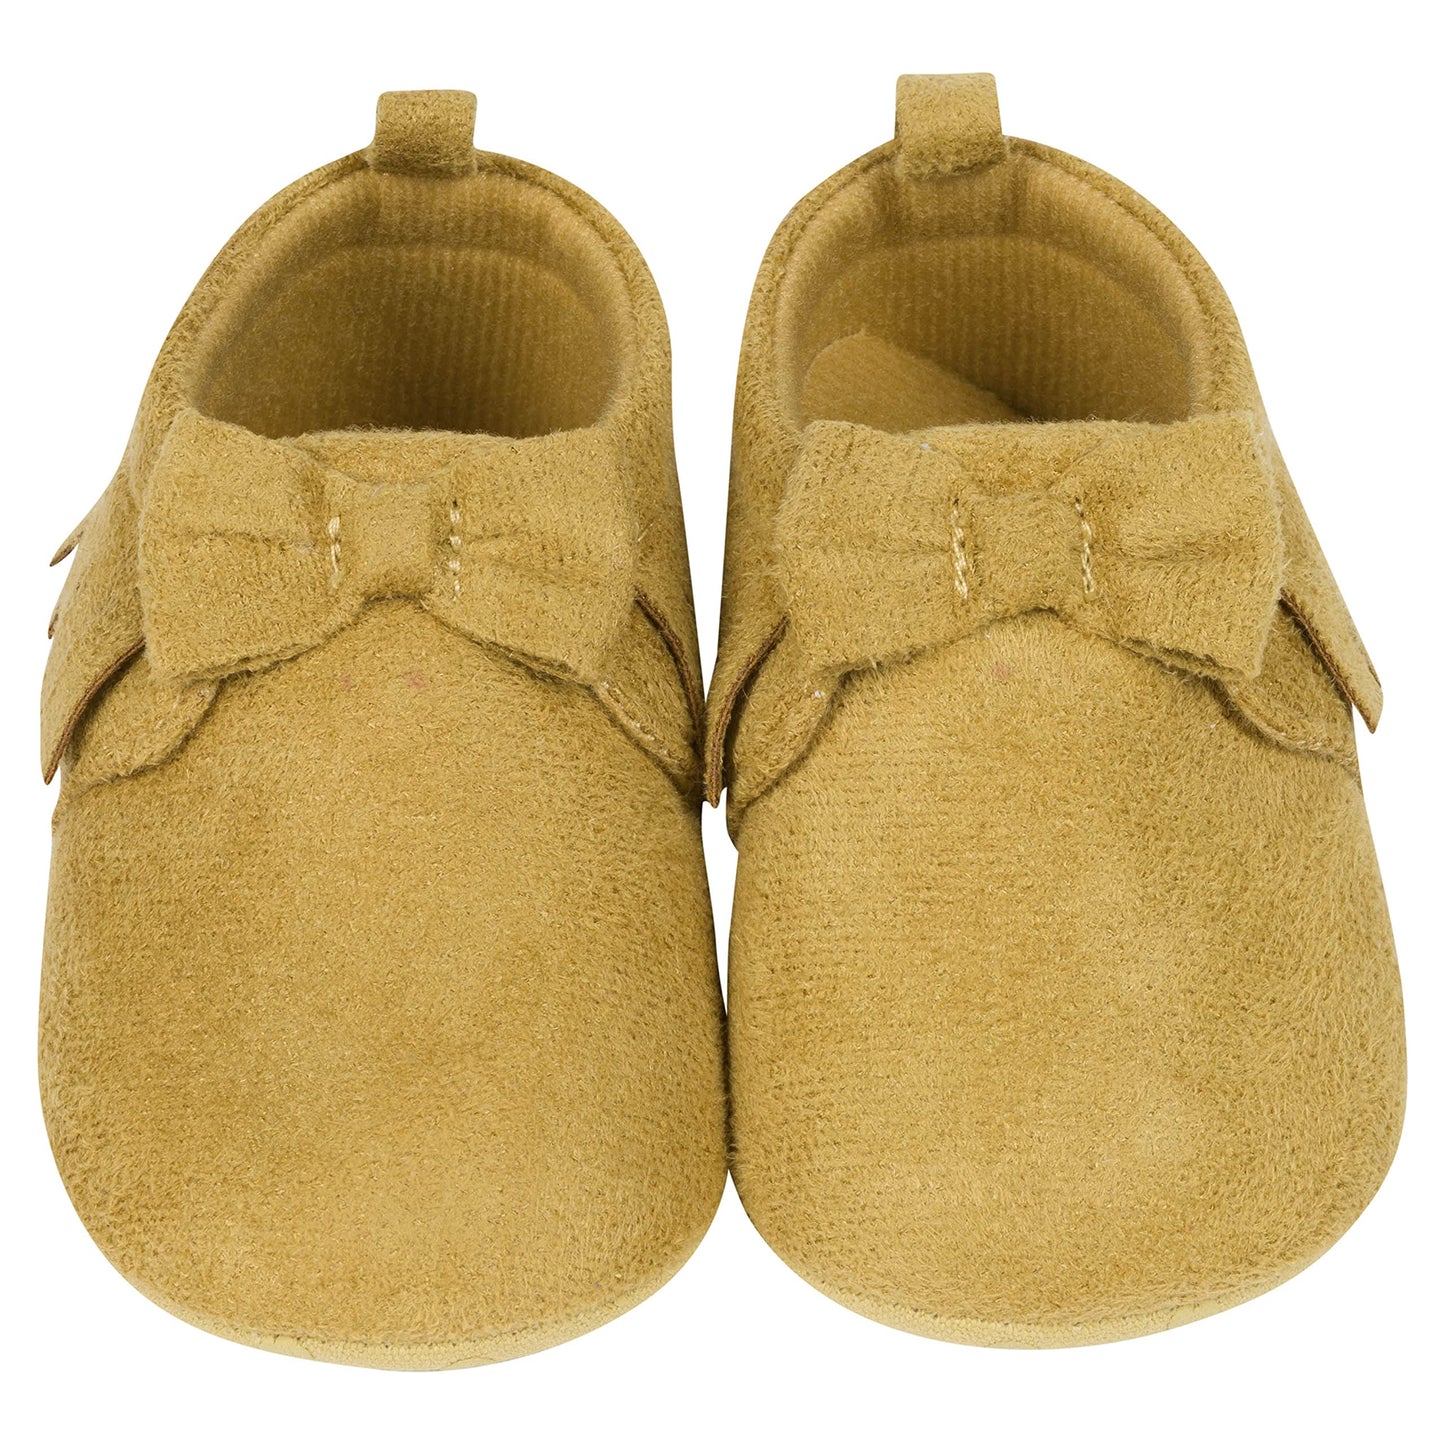 Gerber Baby Moccasins Crib Shoes Newborn Infant Neutral Boys Girls unisex-baby Crib Shoe, for 6 Months baby